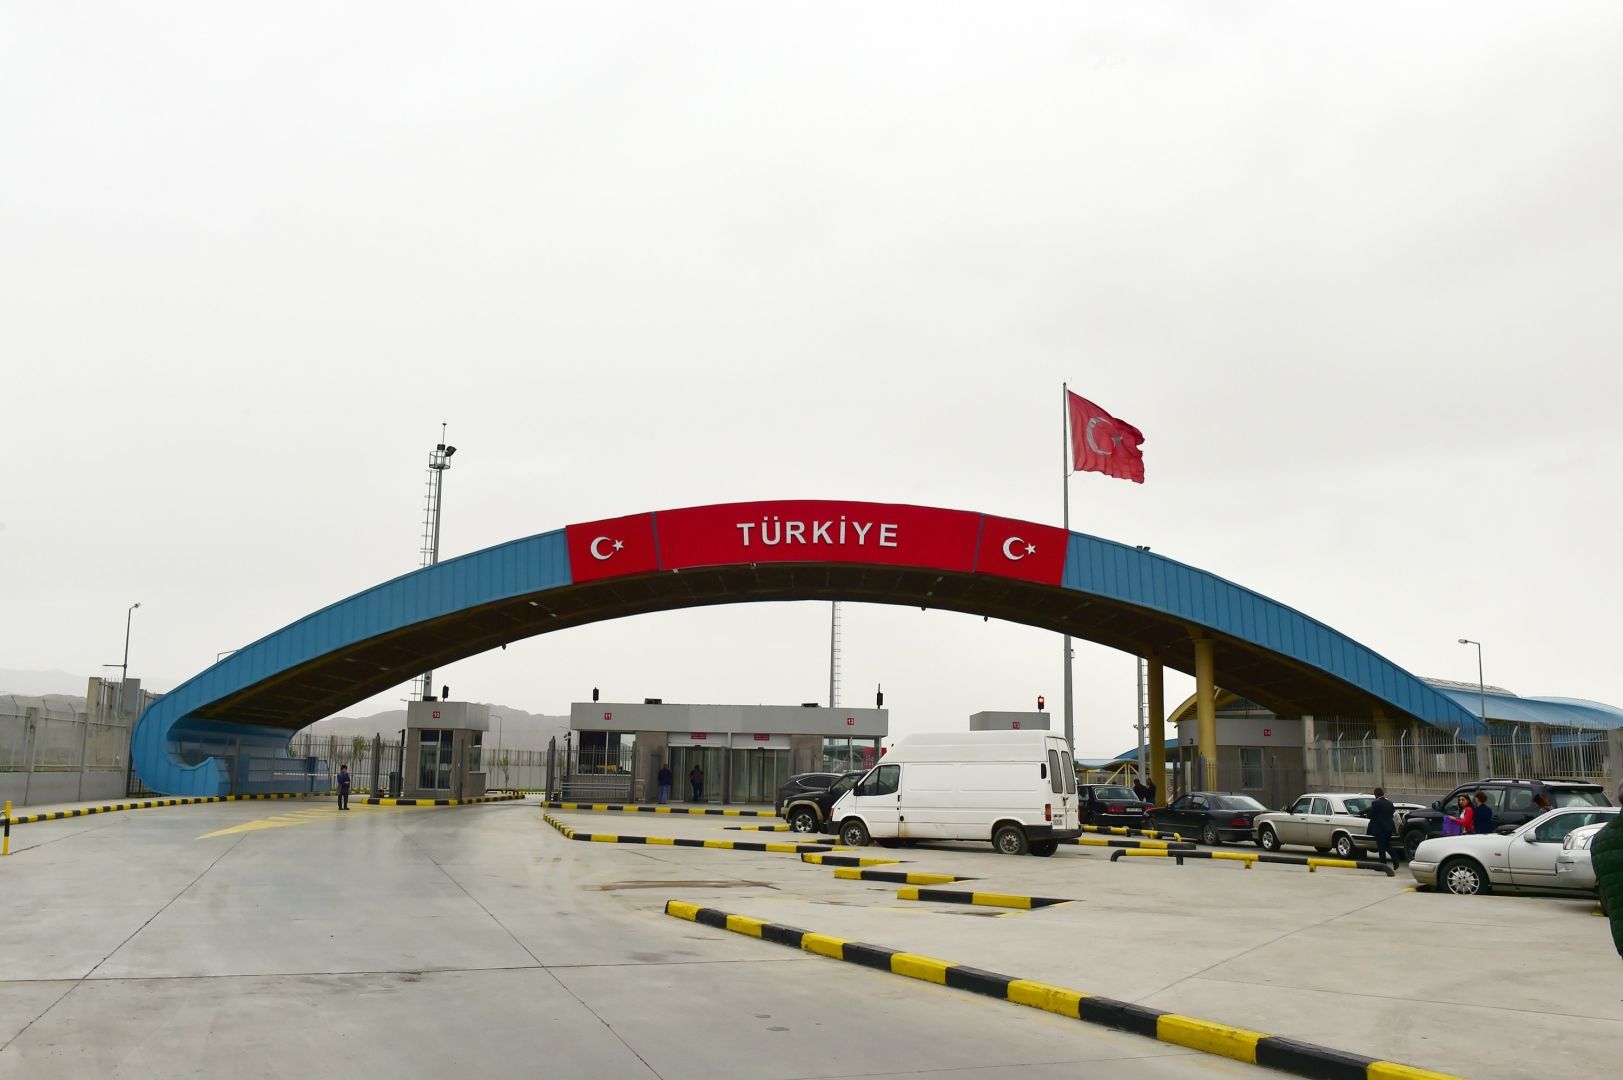 Azerbaijani students studying in Turkiye will be able to cross the land border